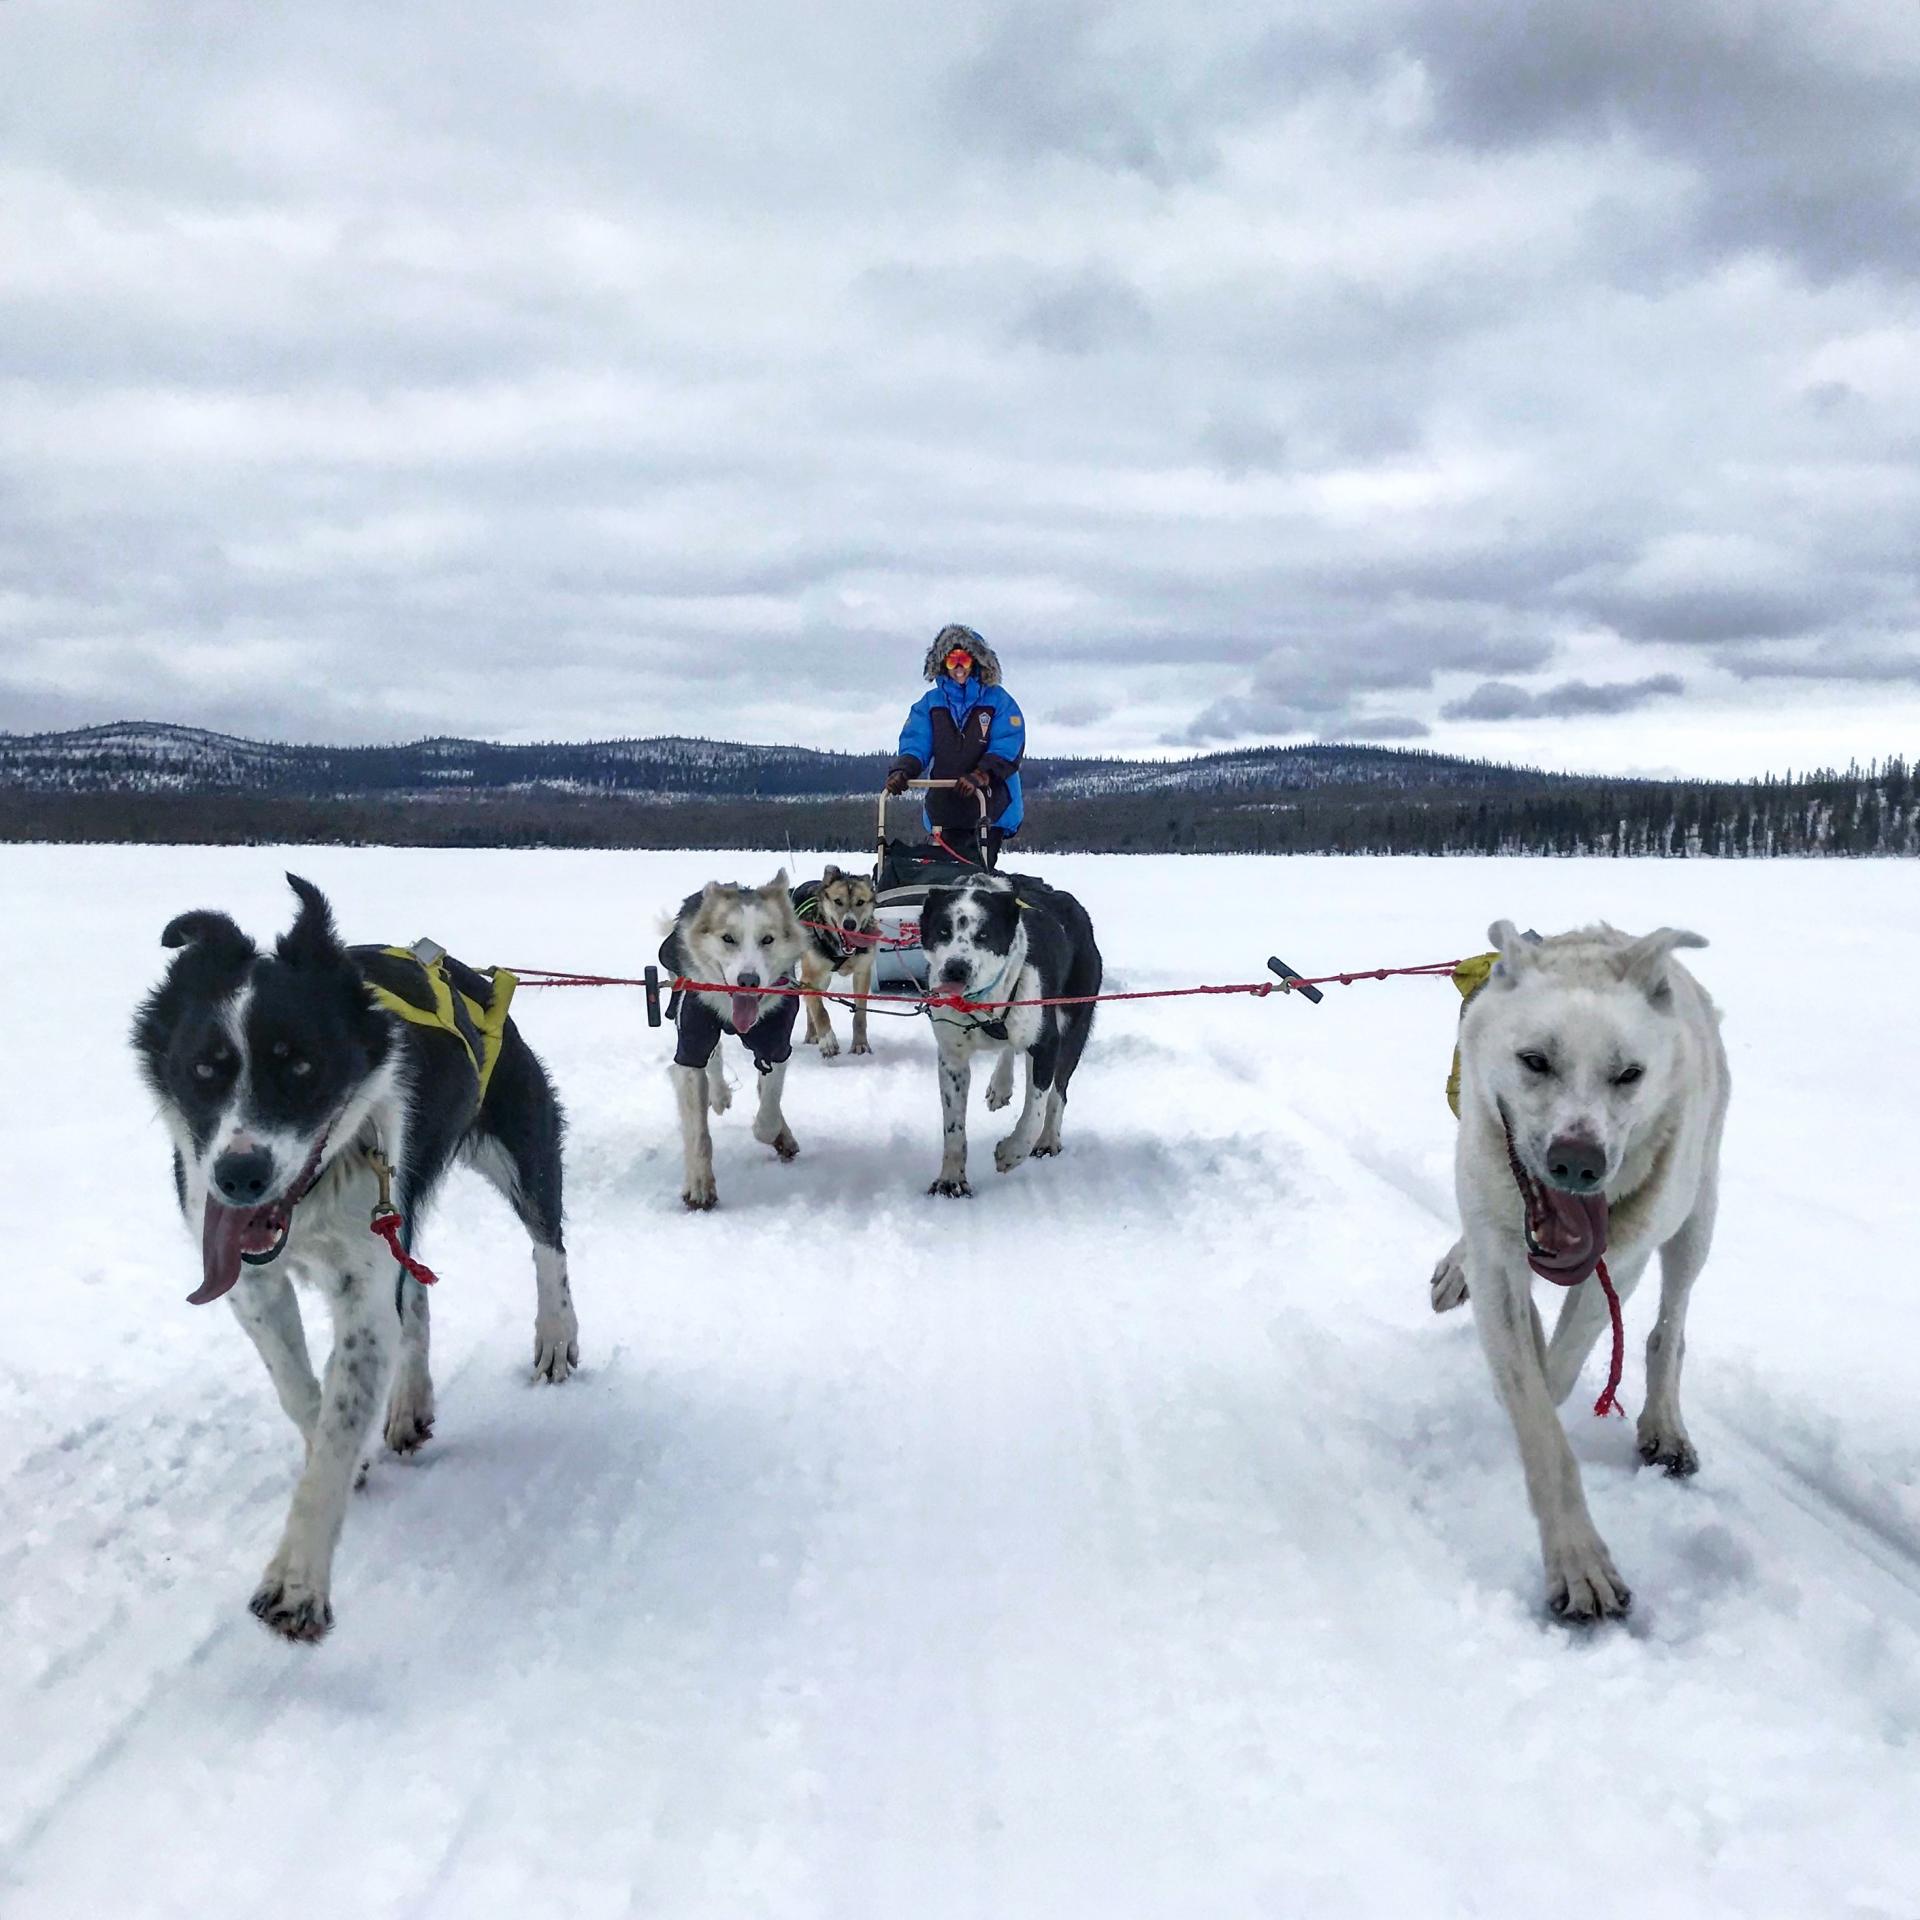 Arctic Adventure: What it’s like to join the Fjällräven Polar expedition